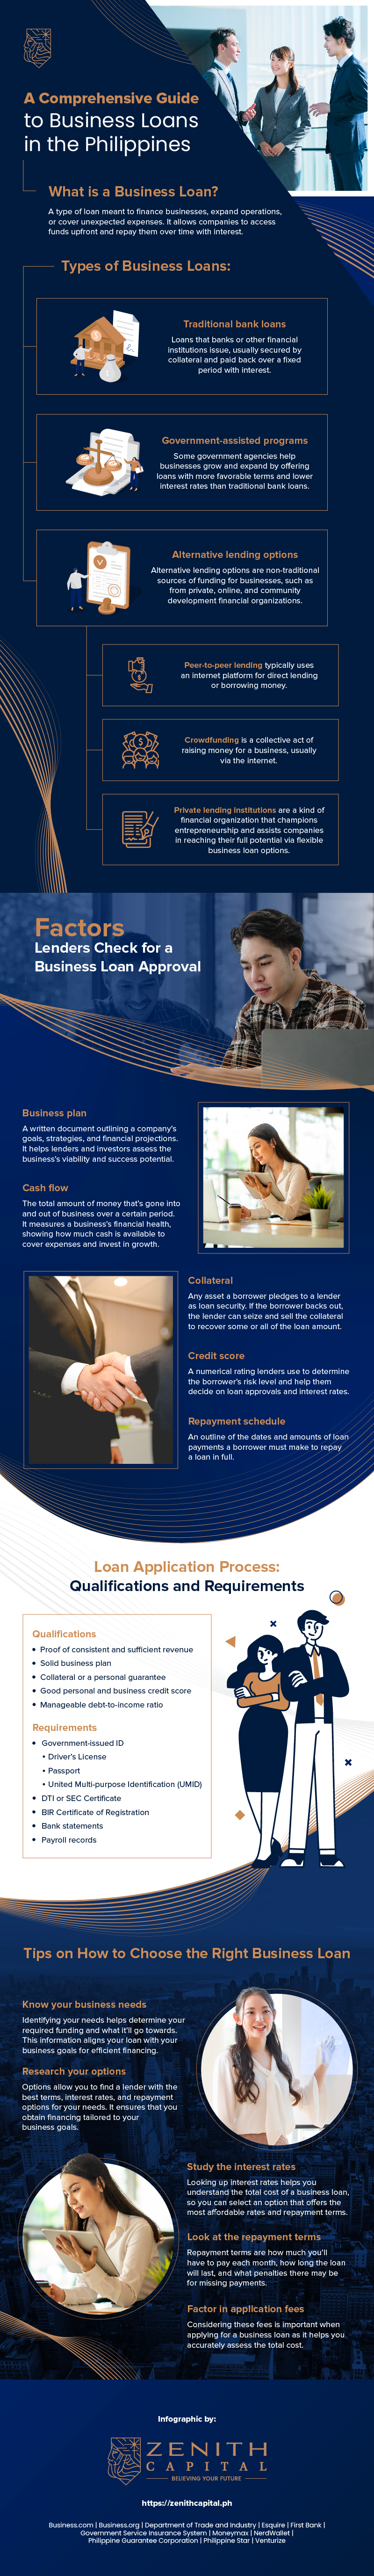 Guide to Business Loans in the Philippines - Zenith Capital Infographic